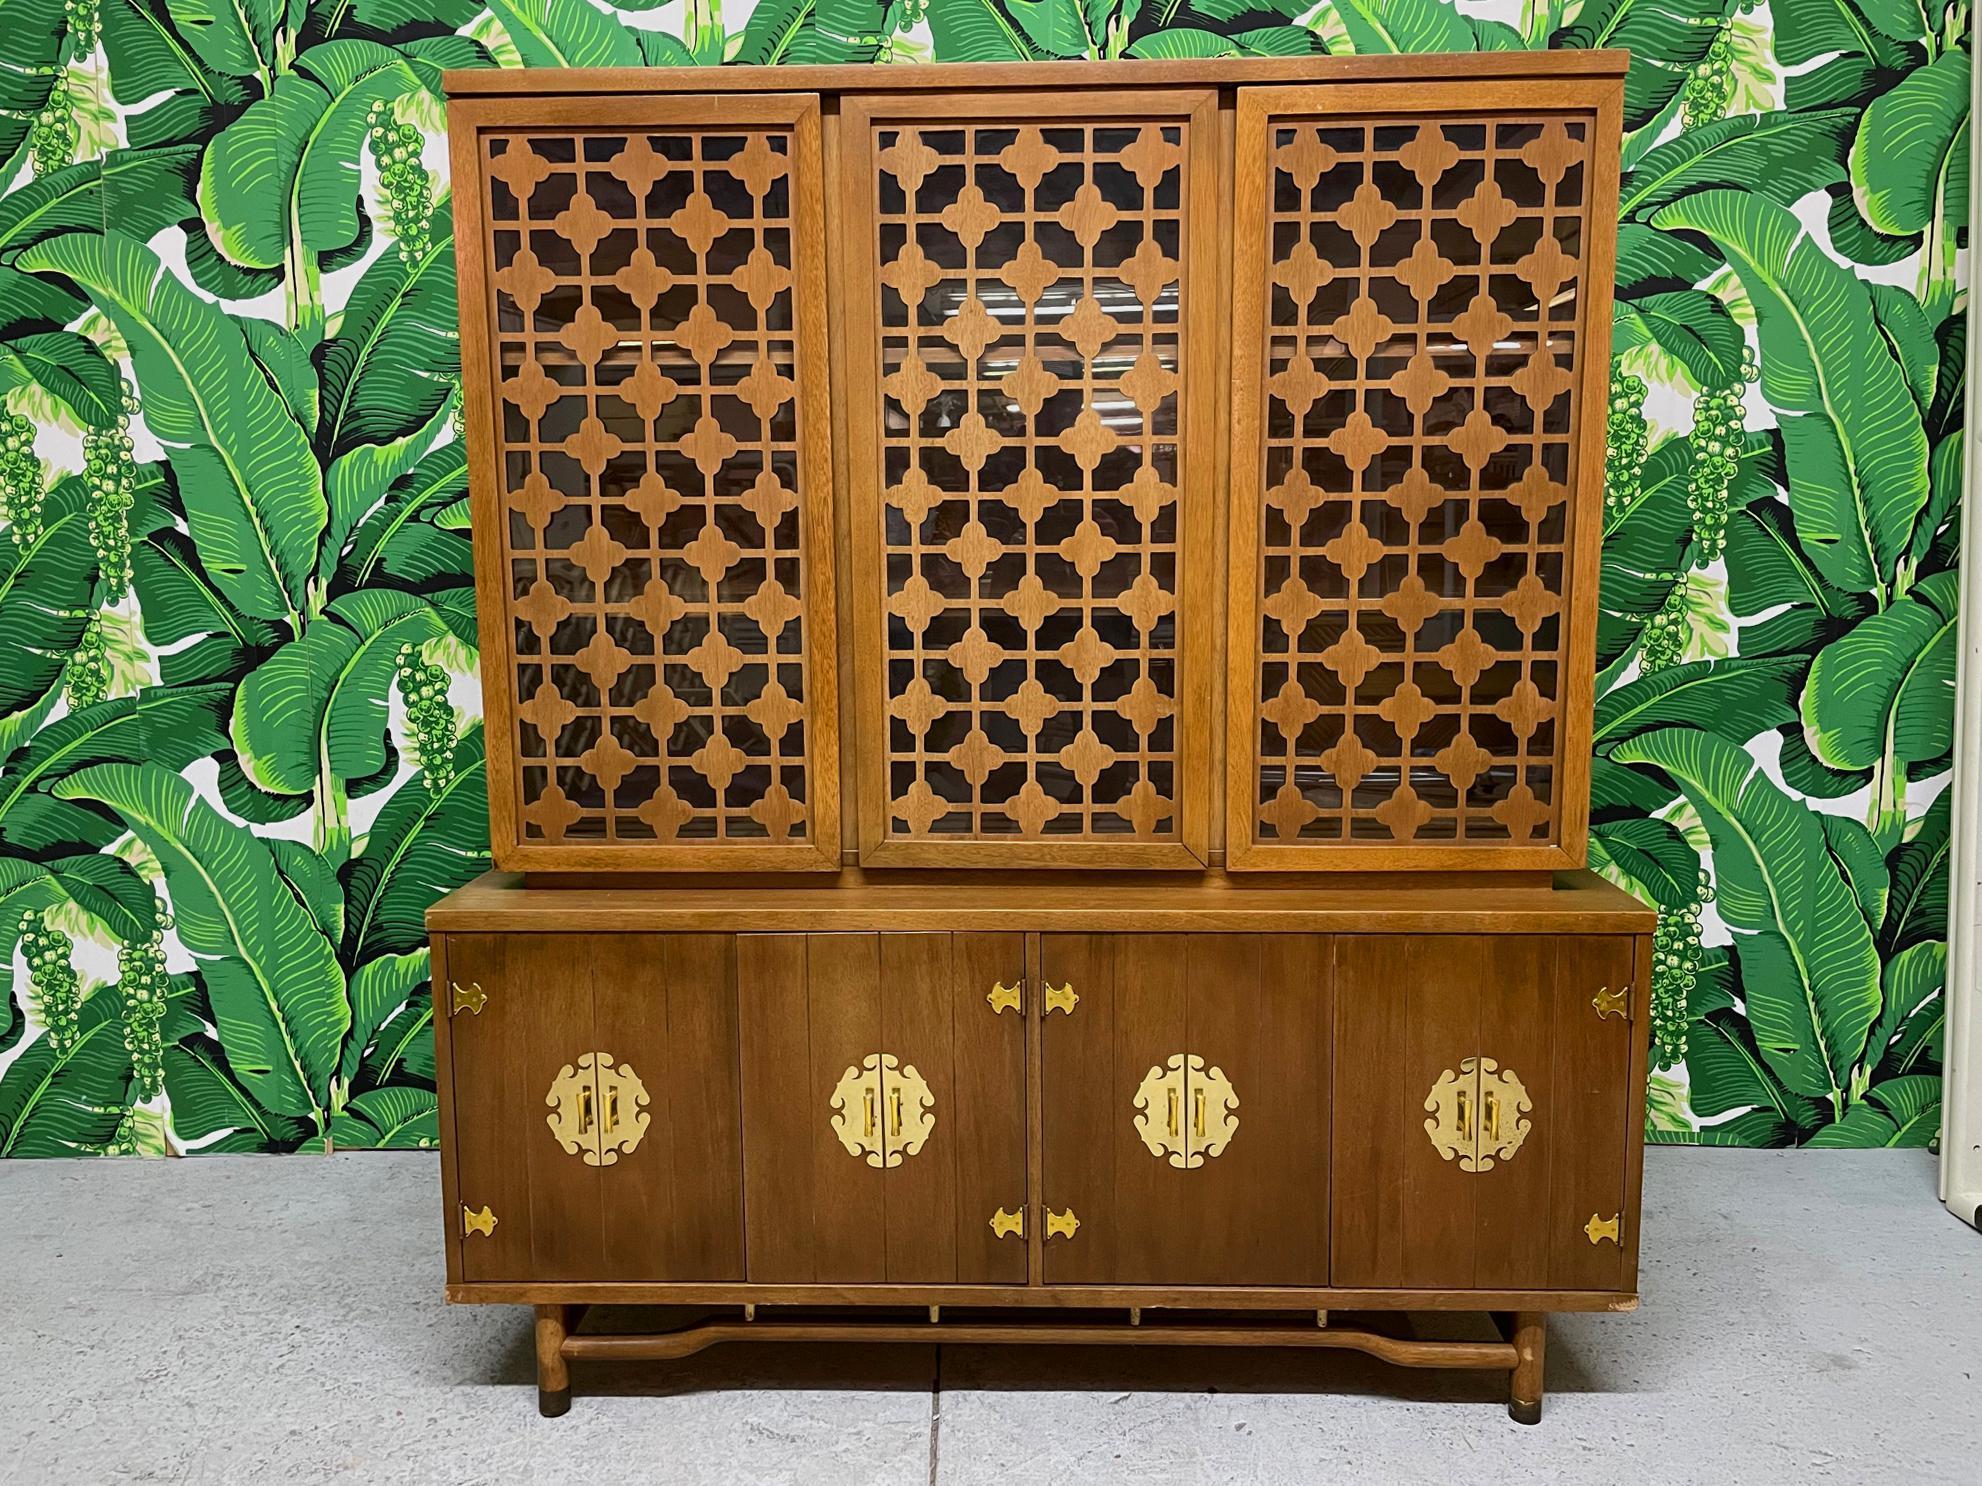 Mid-Century Modern style china cabinet features rattan style legs and brass asian chinoiserie style hardware. Good condition with minor imperfections consistent with age. May exhibit scuffs, marks, or wear, see photos for details.

 